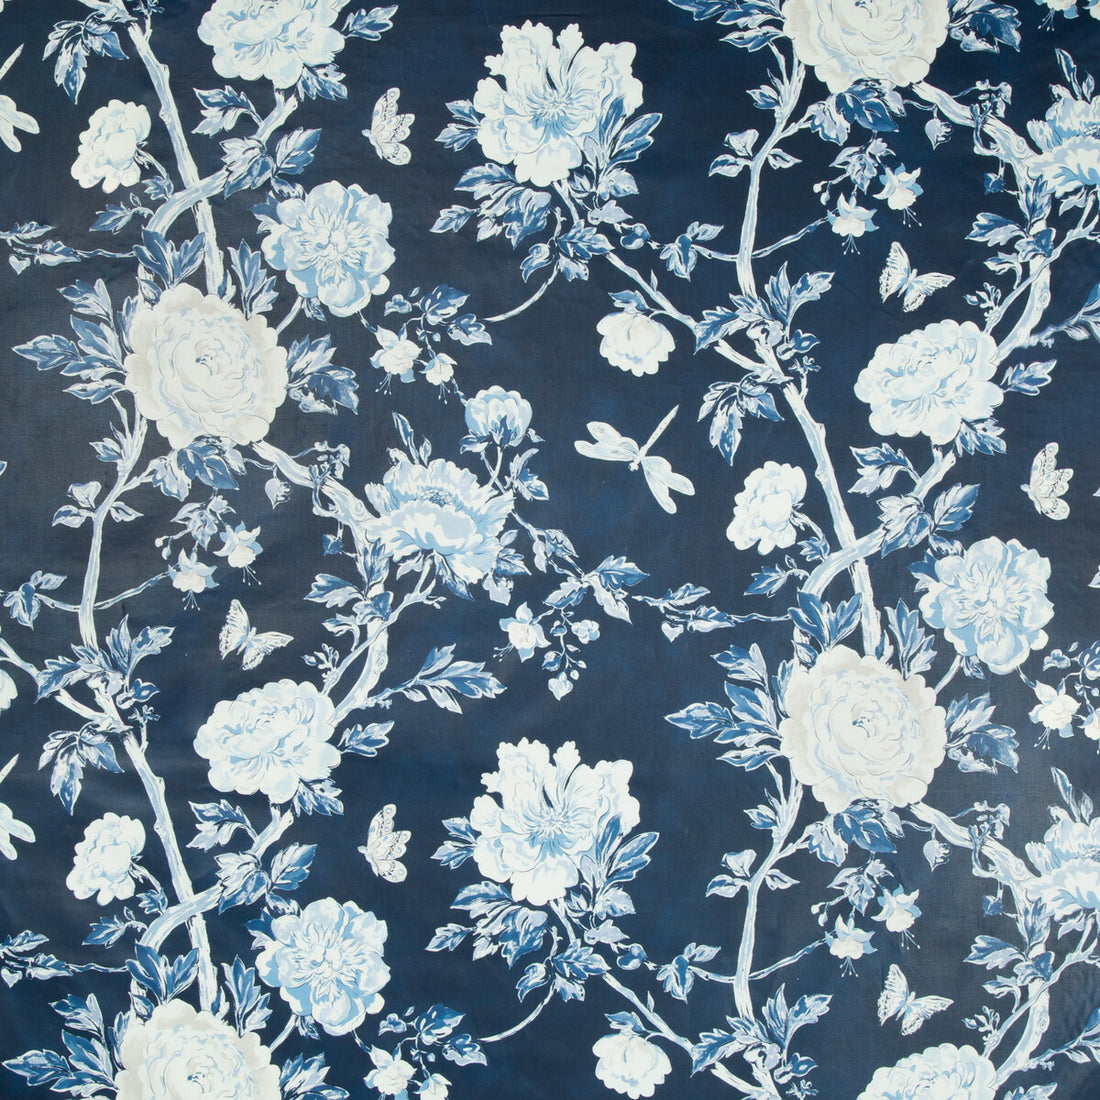 Les Pivoines Print fabric in blue color - pattern 8017135.5.0 - by Brunschwig &amp; Fils in the Les Ensembliers collection